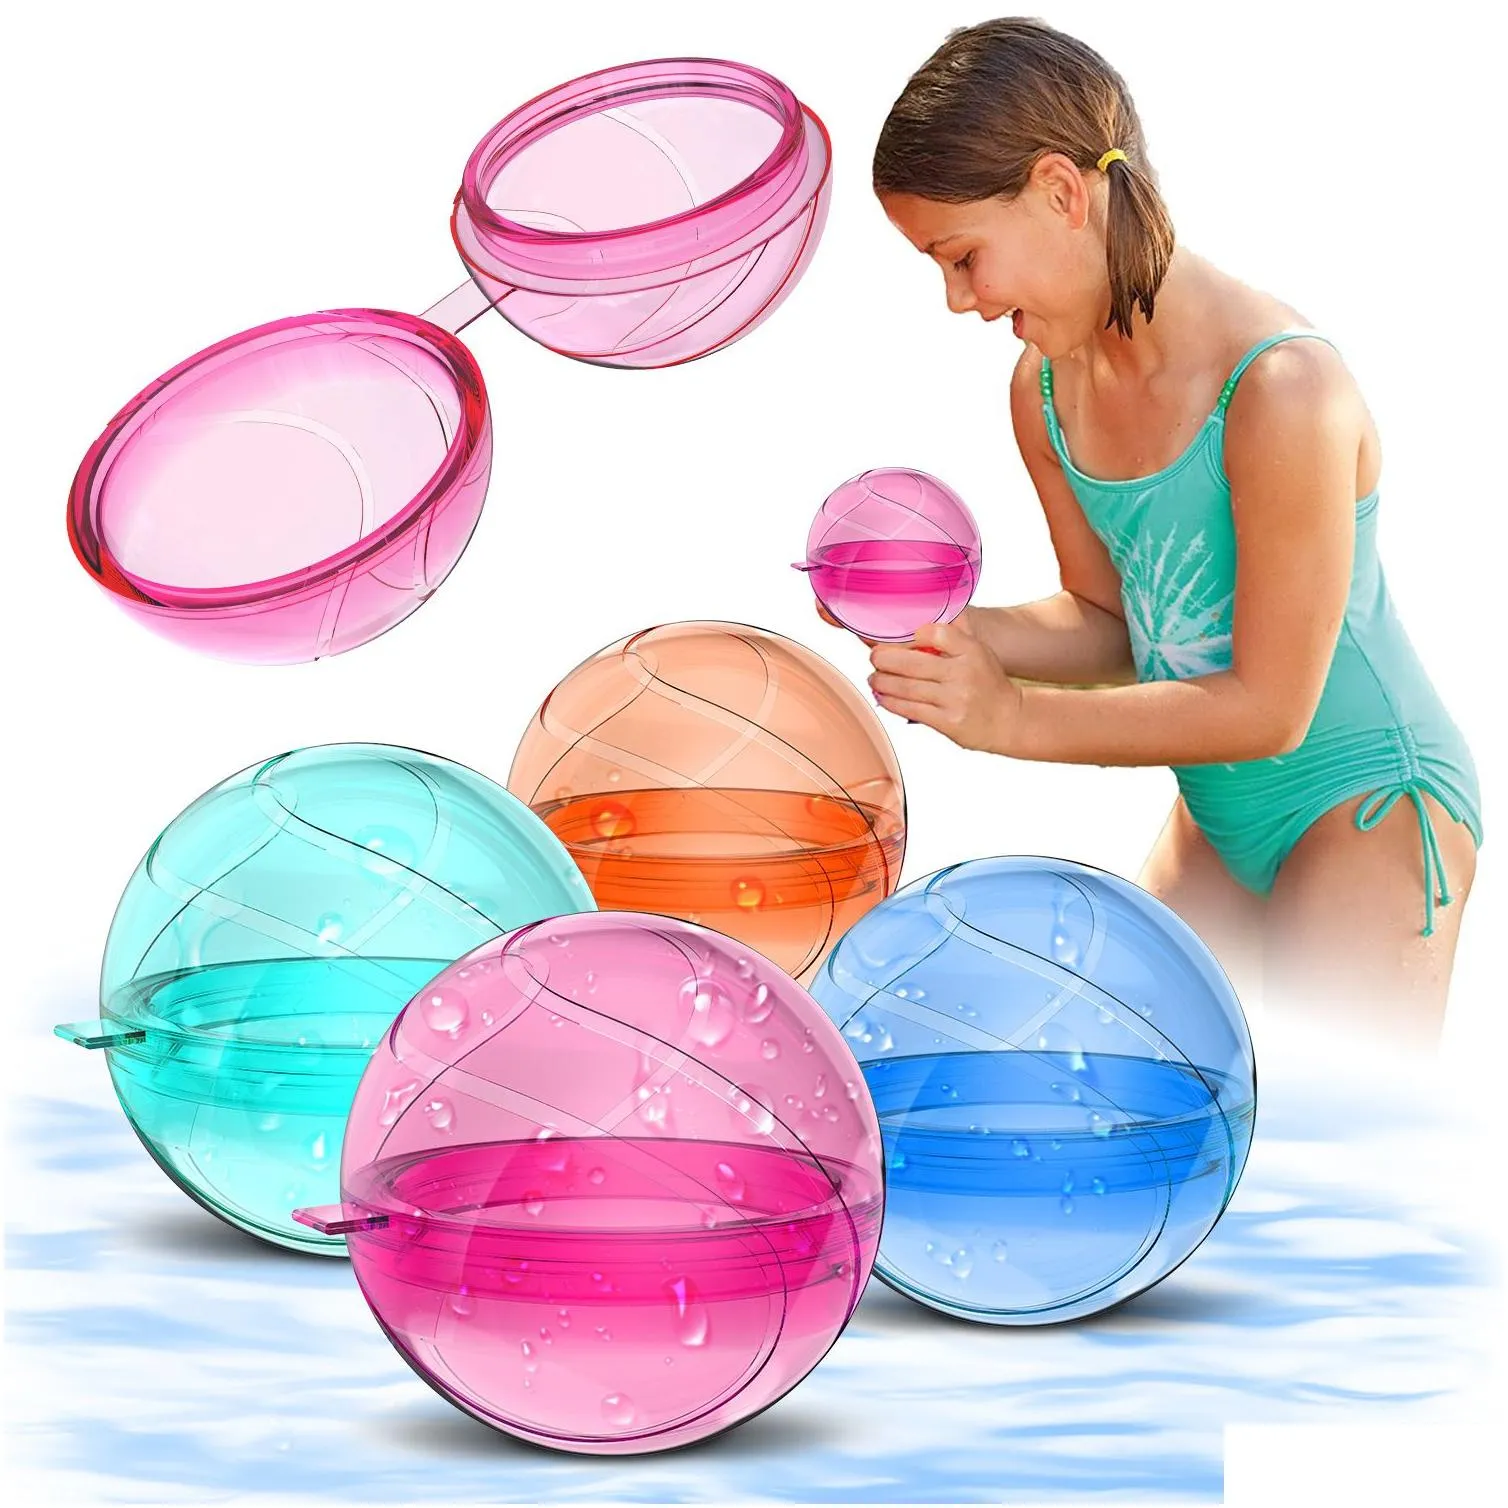  creative silicone fast-fill water ball water fight toys silicone water balloon ocean ball